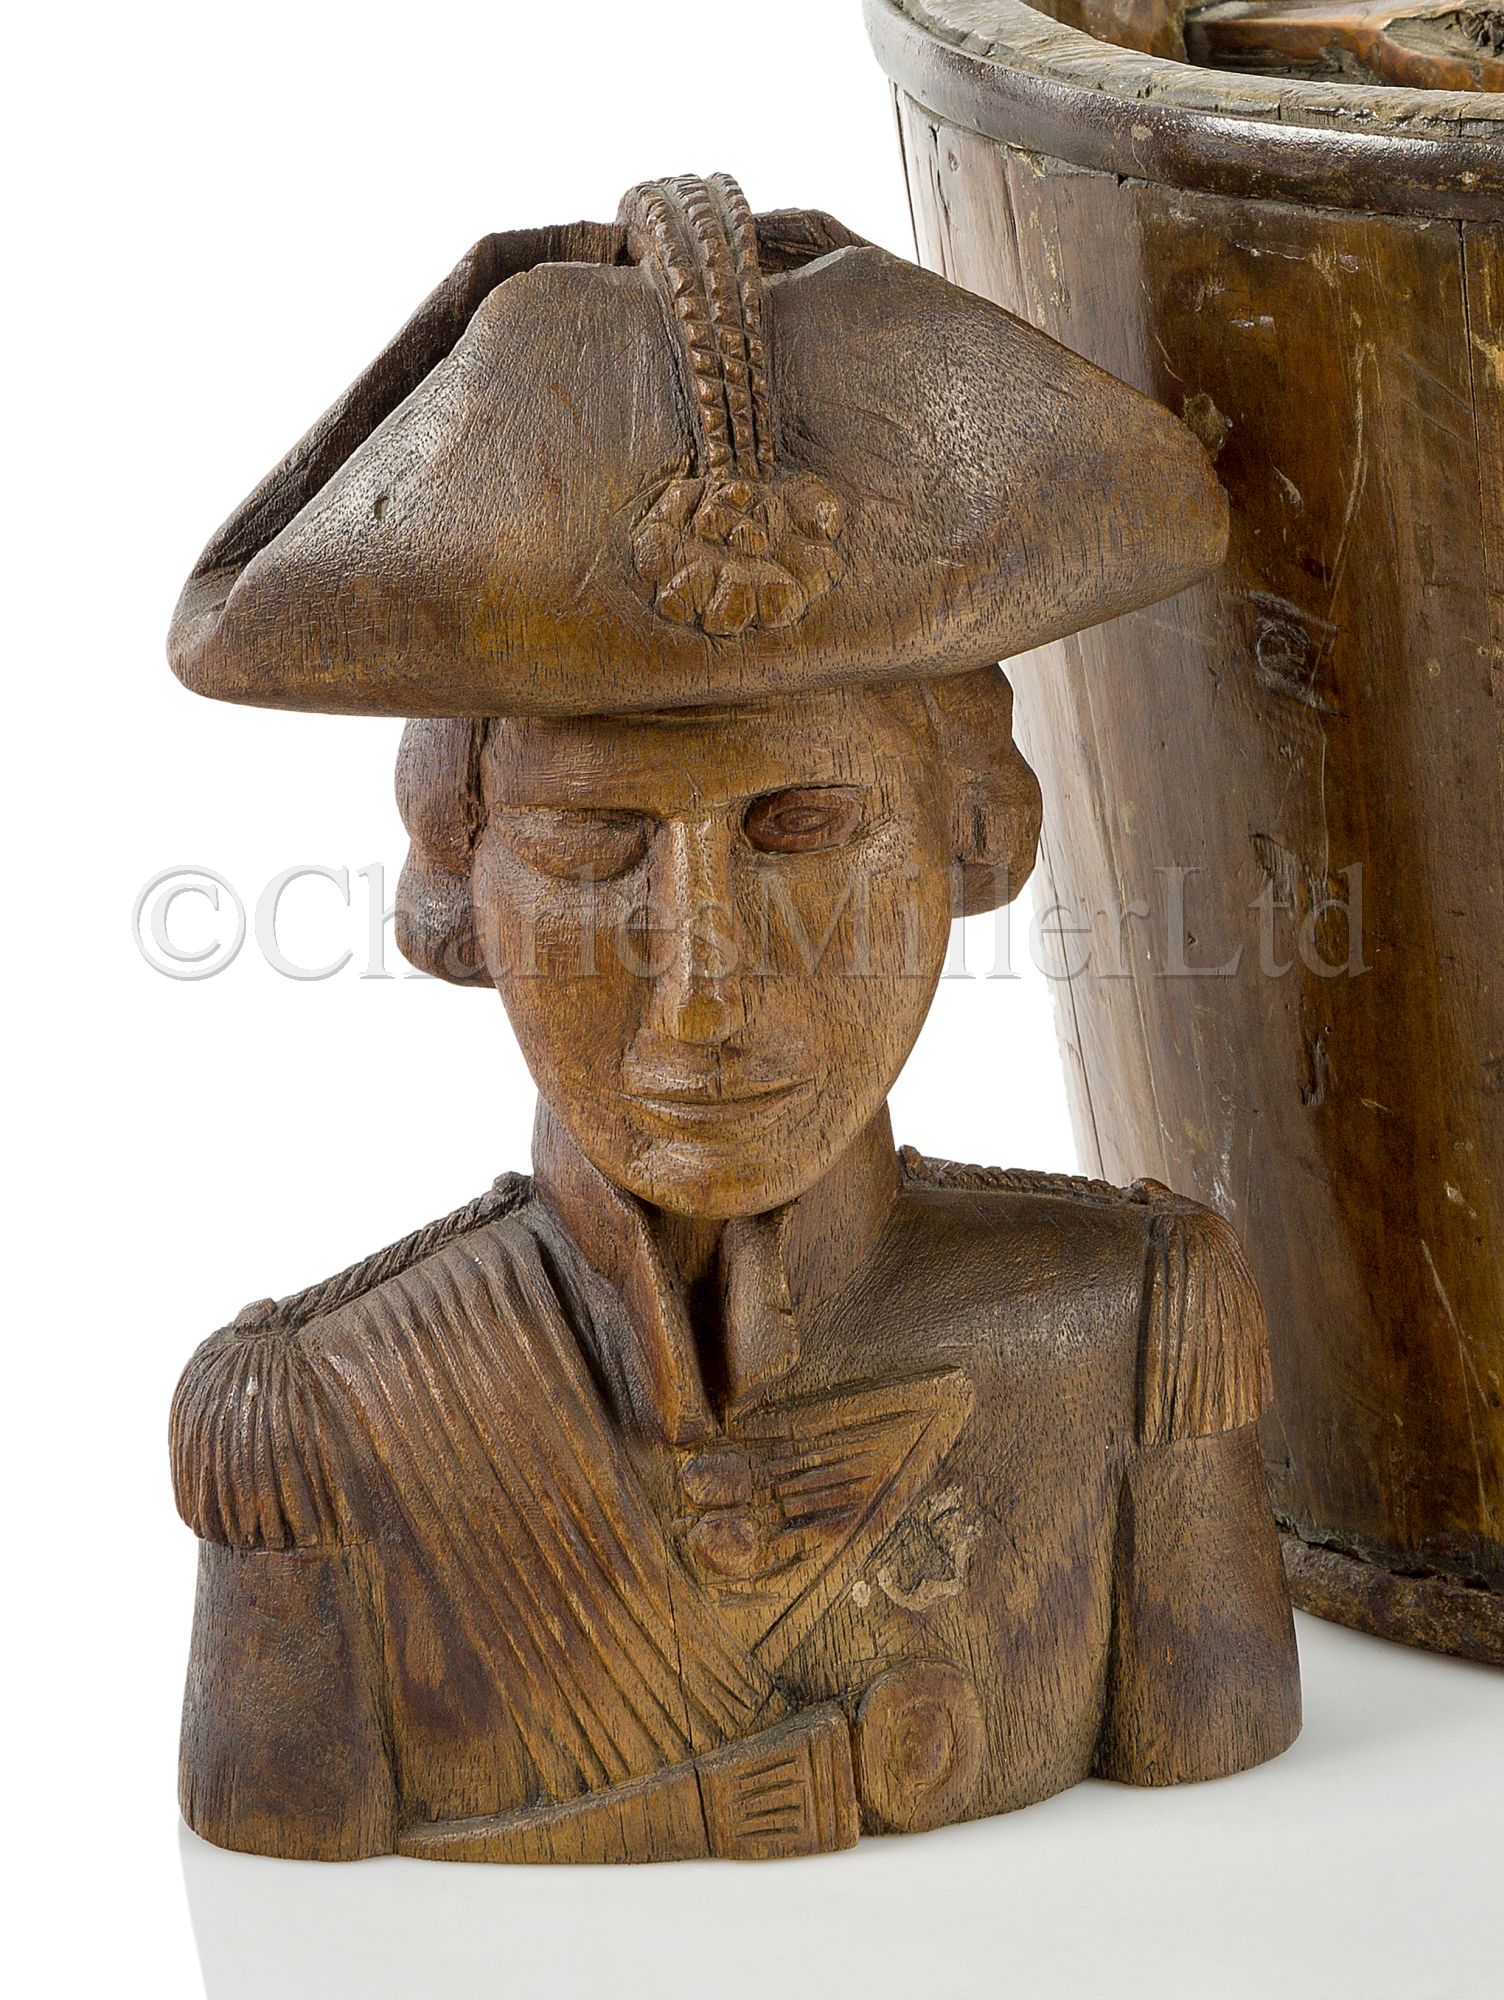 AN EARLY 19TH CENTURY, ENGLISH SAILORWORK, CARVED OAK BUST OF ADMIRAL LORD NELSON